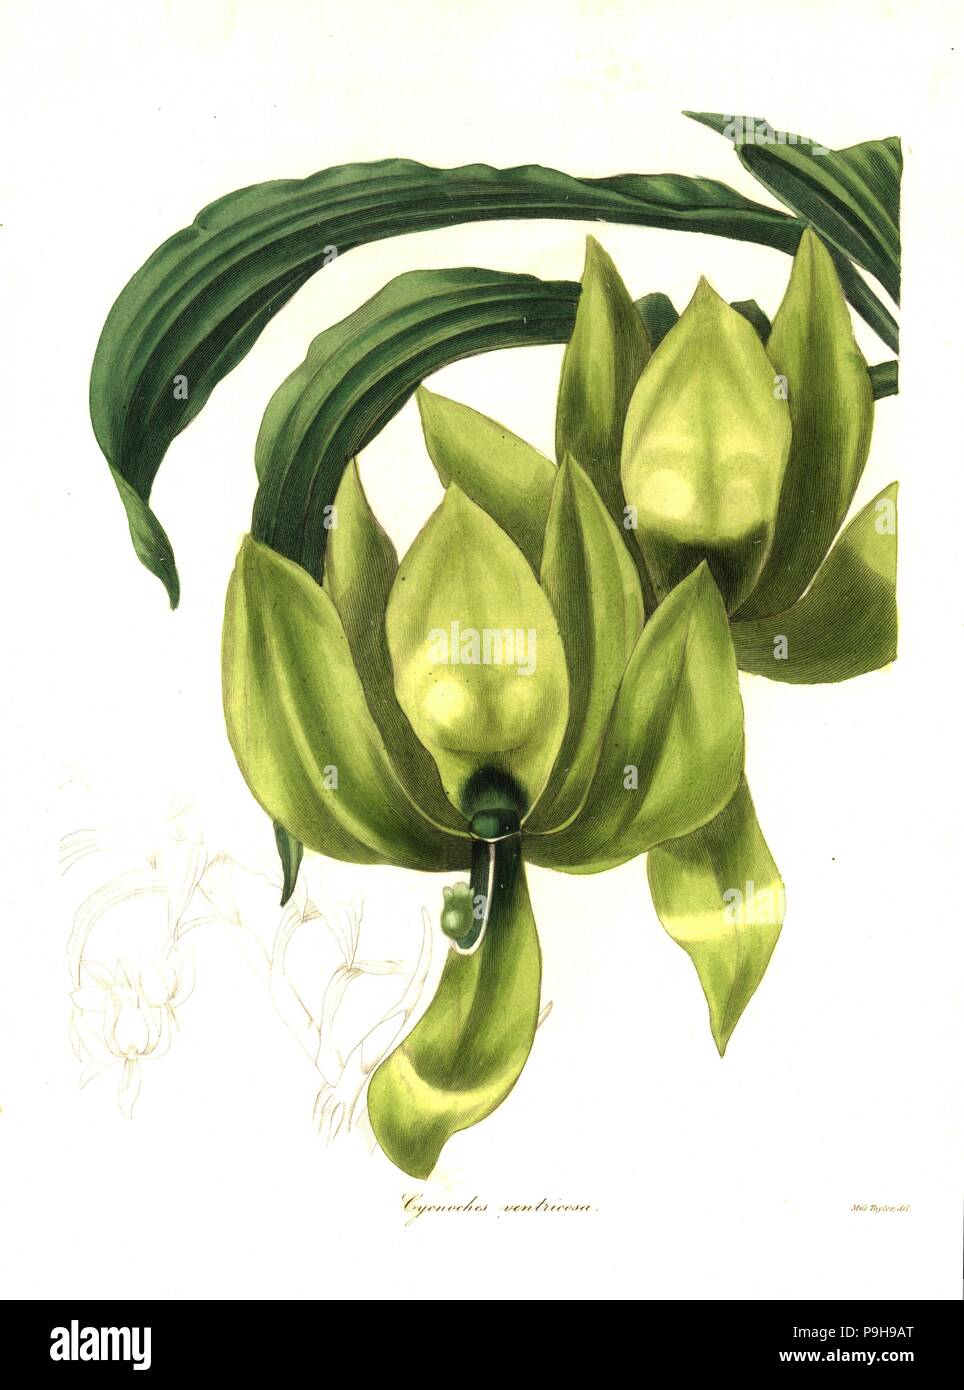 Cycnoches ventricosum orchid (Ventricose cycnoches, Cycnoches ventricosus). Handcoloured copperplate engraving after a botanical illustration by Miss Jane Taylor from Benjamin Maund and the Rev. John Stevens Henslow's The Botanist, London, 1836. Stock Photo